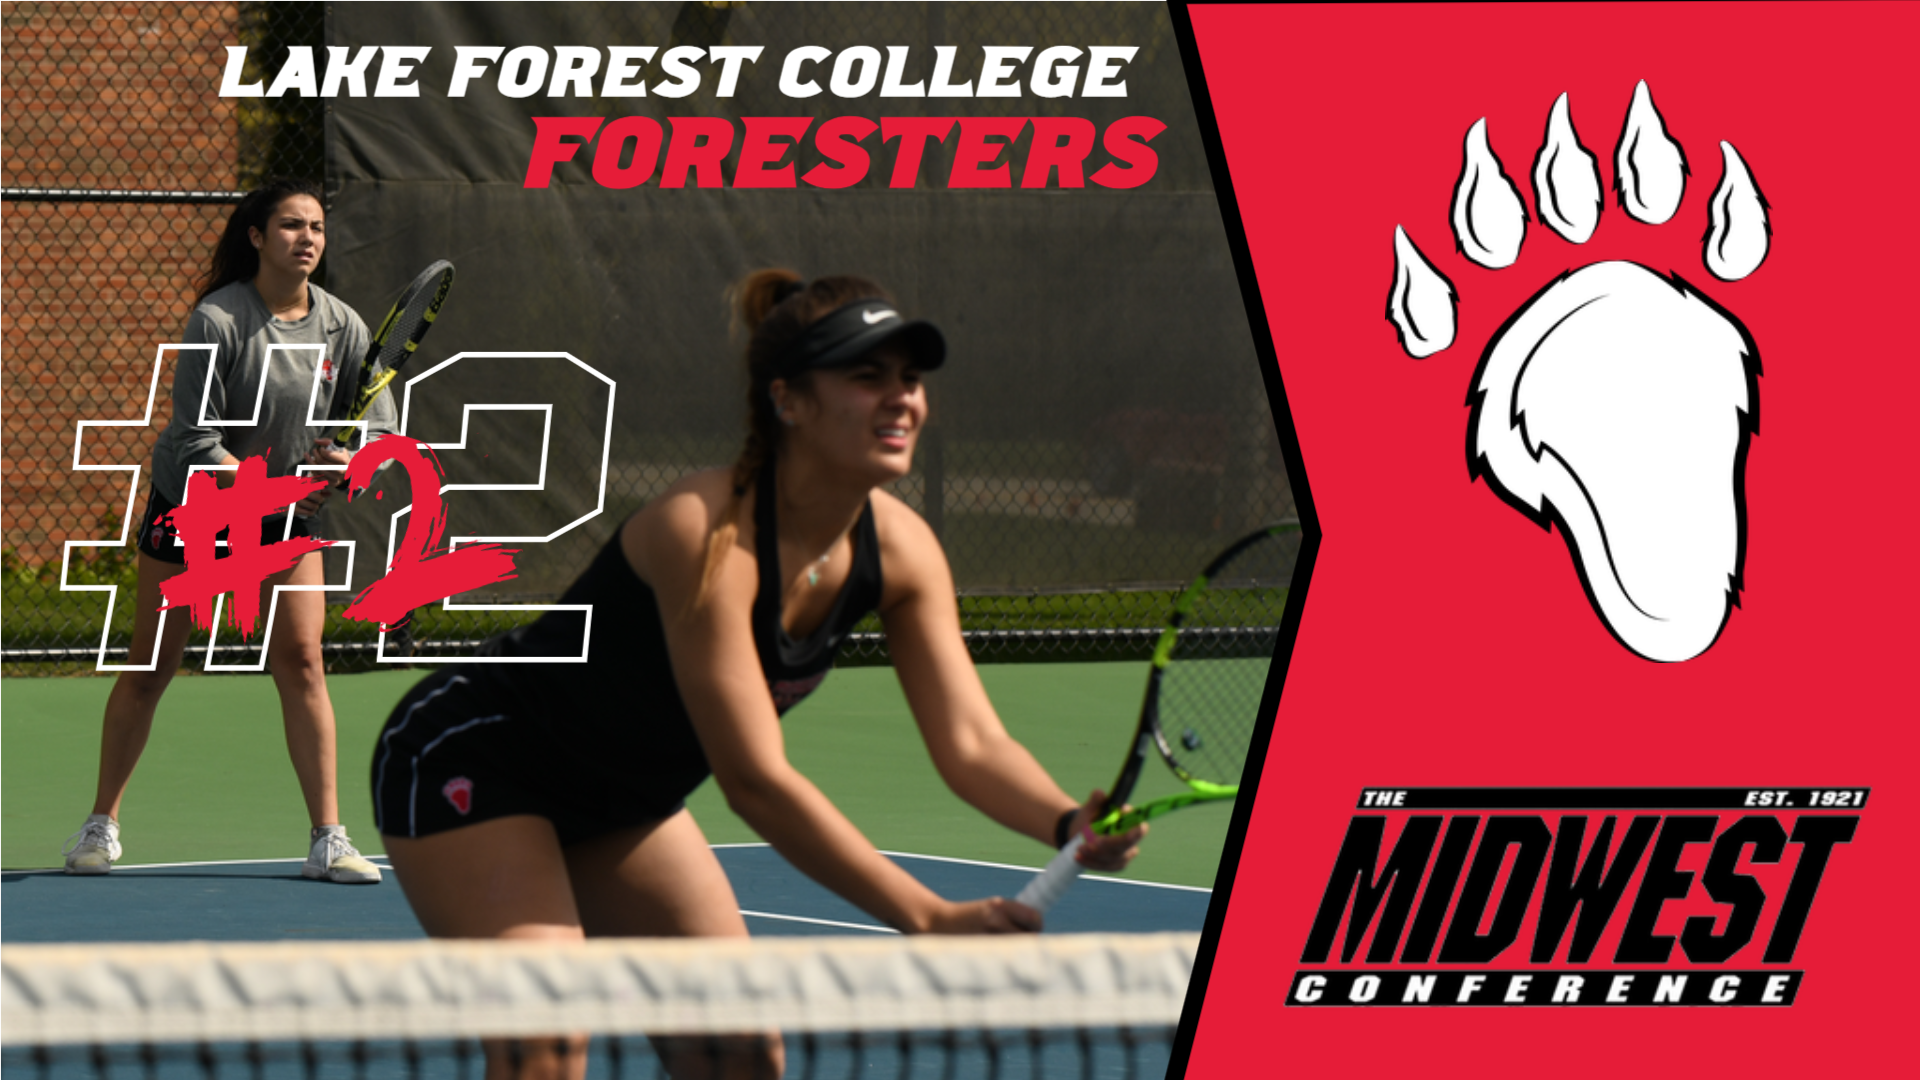 Foresters Listed Second in MWC Preseason Coaches Poll